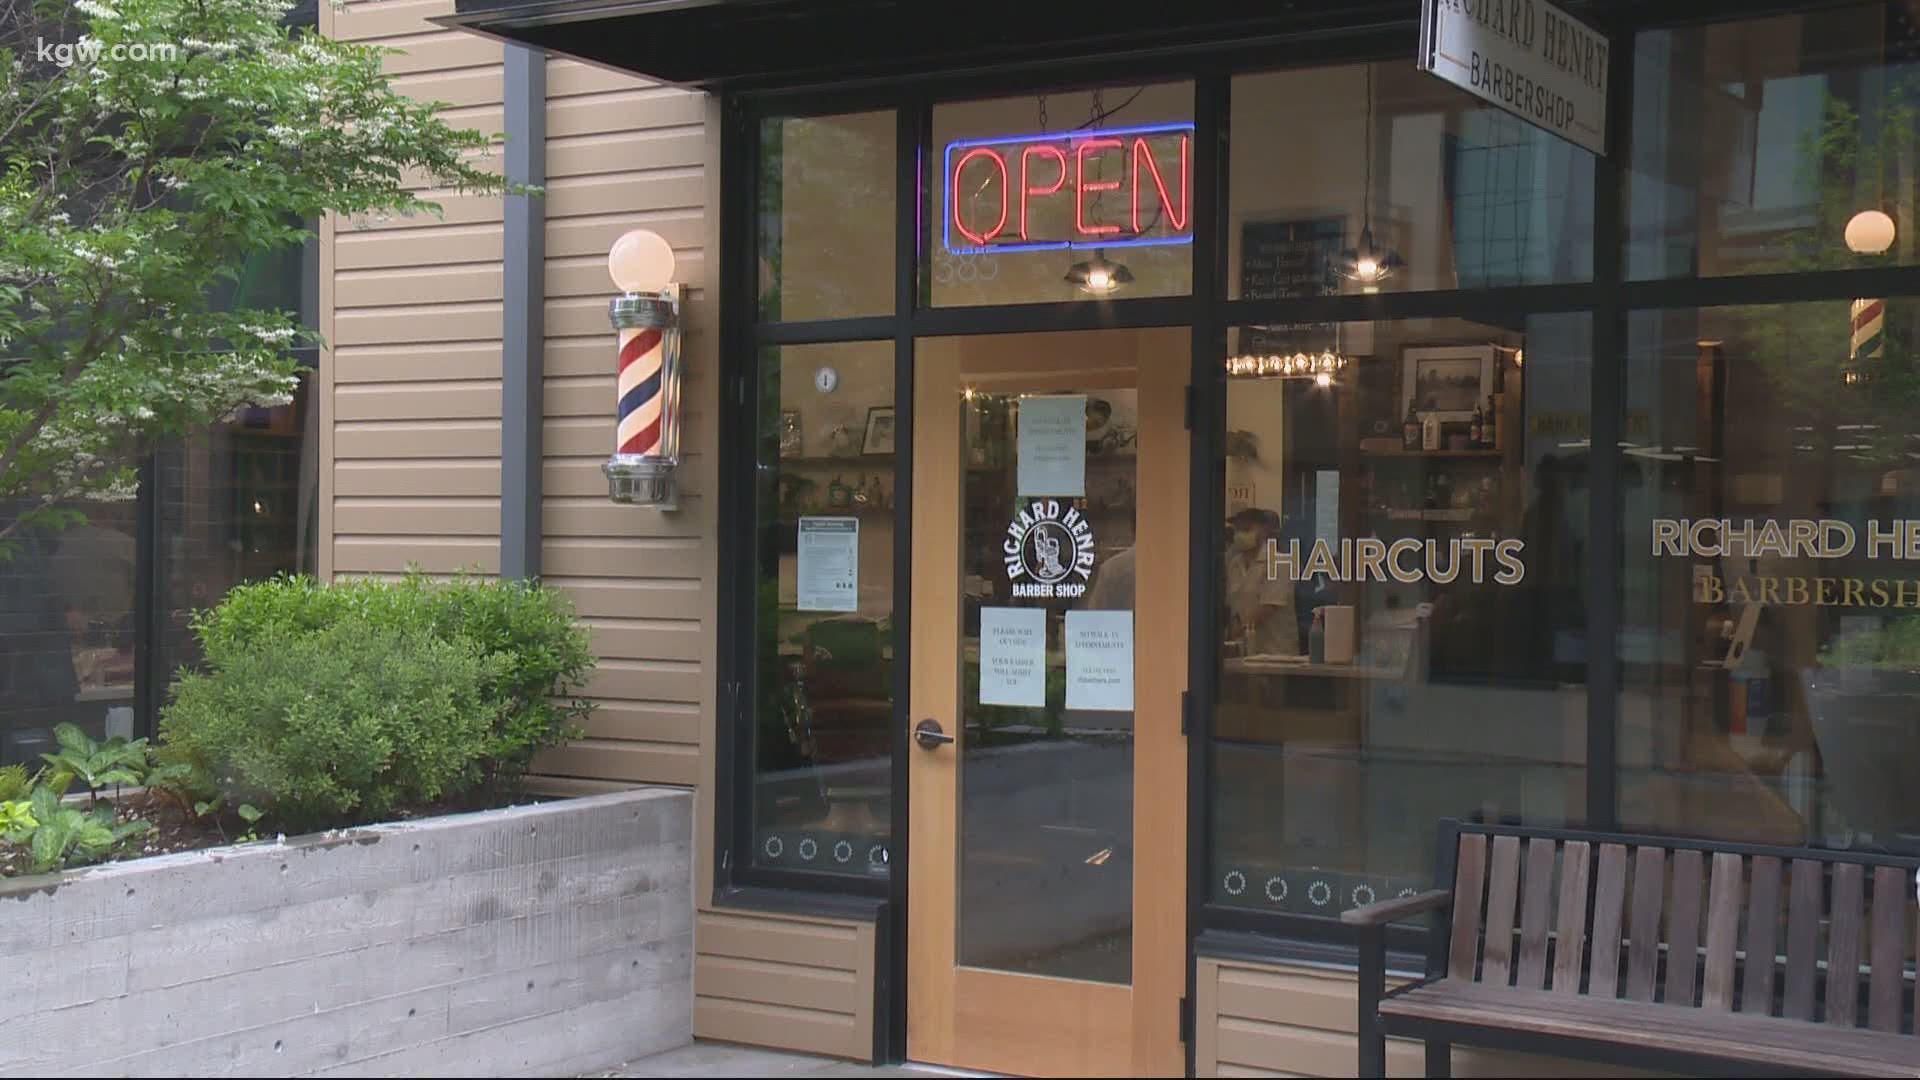 Entering Phase 1 means restaurants, bars, salons and gyms can reopen in Clackamas County, with restrictions meant to slow the virus spread.